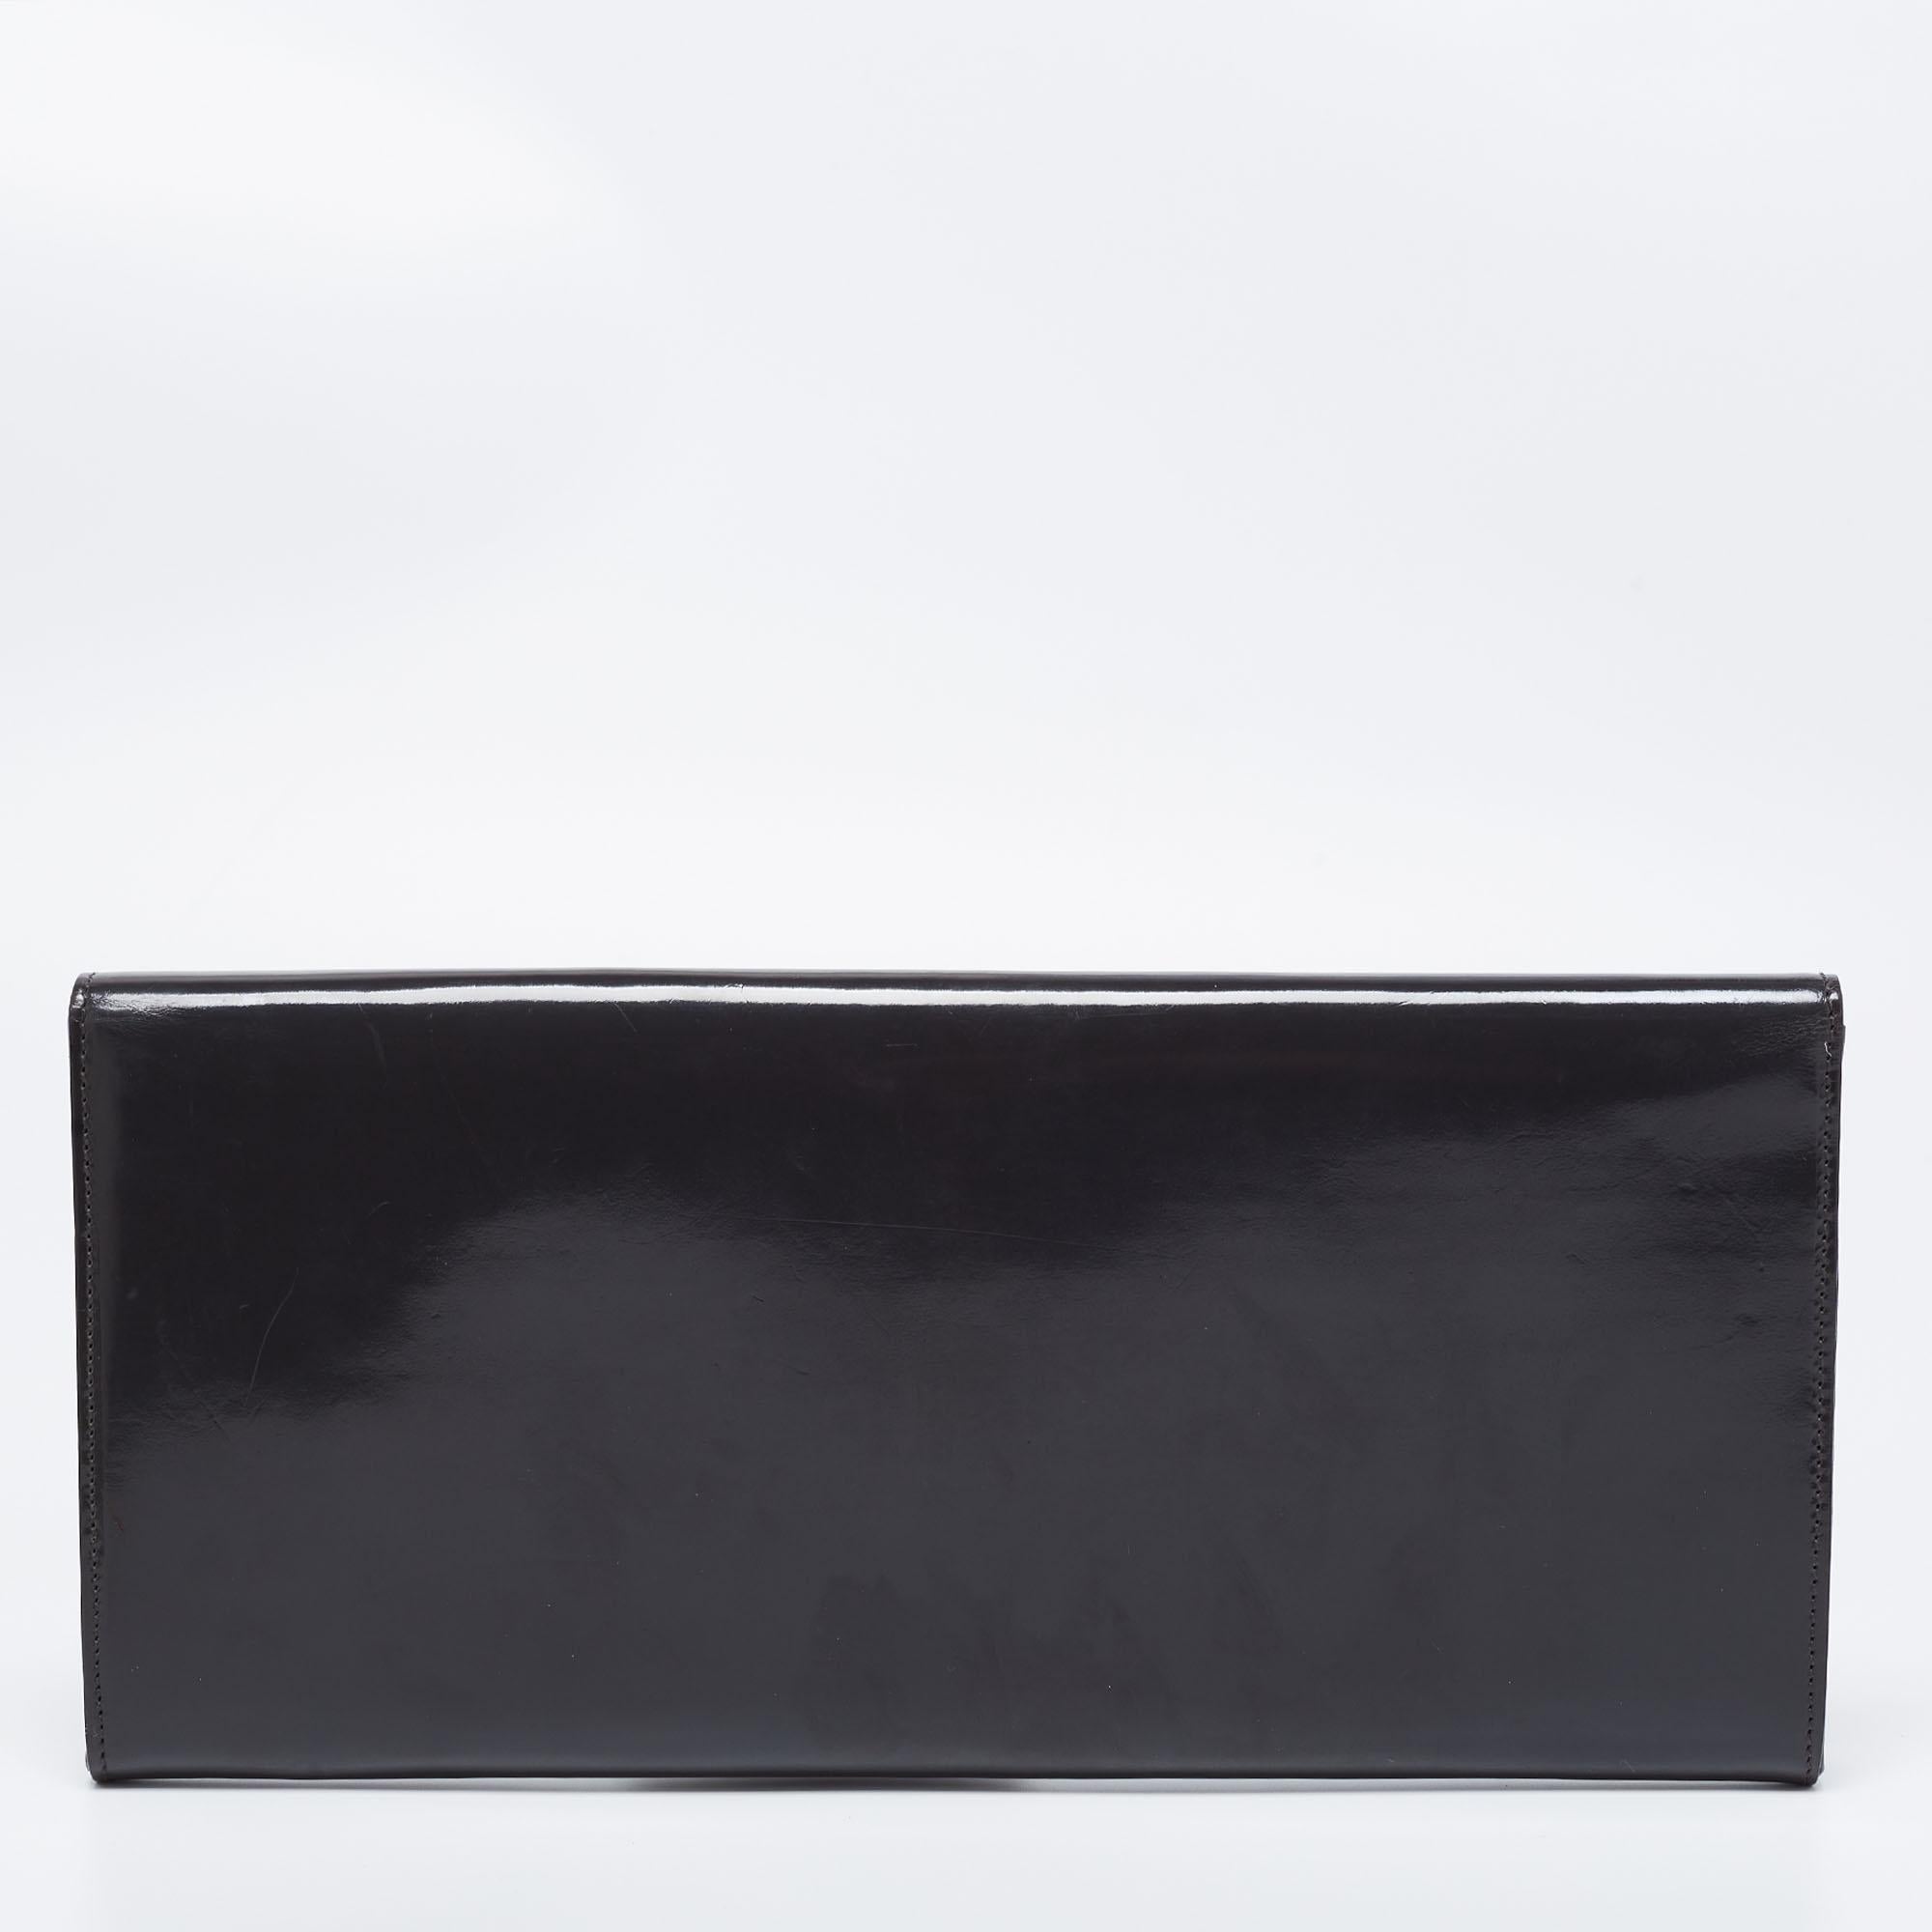 This sleek Sigrid clutch from Gucci is a masterpiece. Crafted in Italy, it is made of patent leather and comes in a beautiful shade of grey. It flaunts a front flap that features delicate silver-tone cutout detailing and the brand logo. The bag